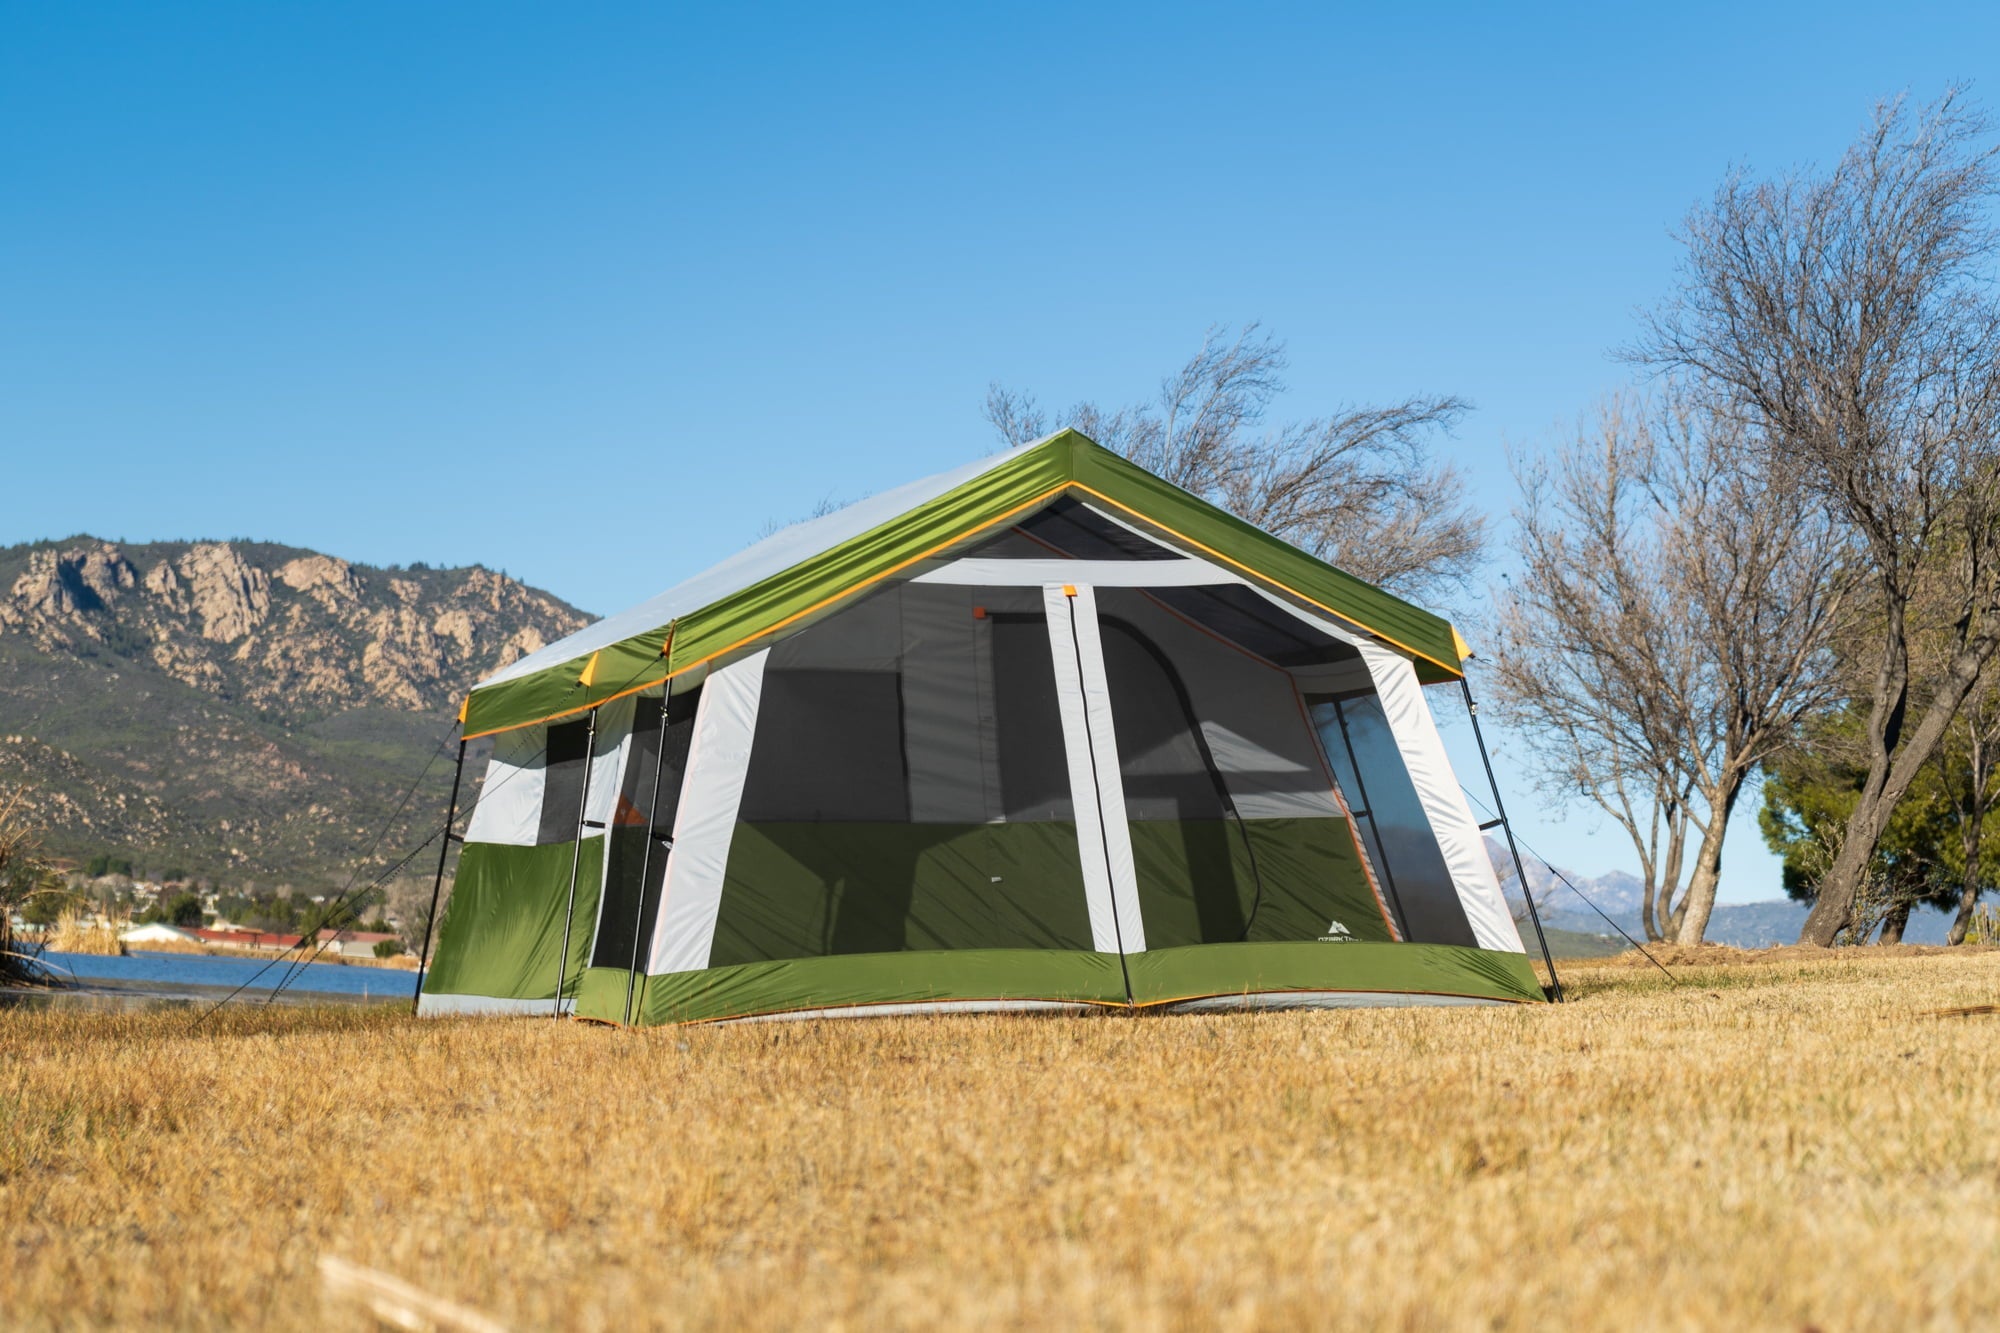 Ozark Trail 8-Person Family Cabin Tent 1 Room with Screen Porch, Green